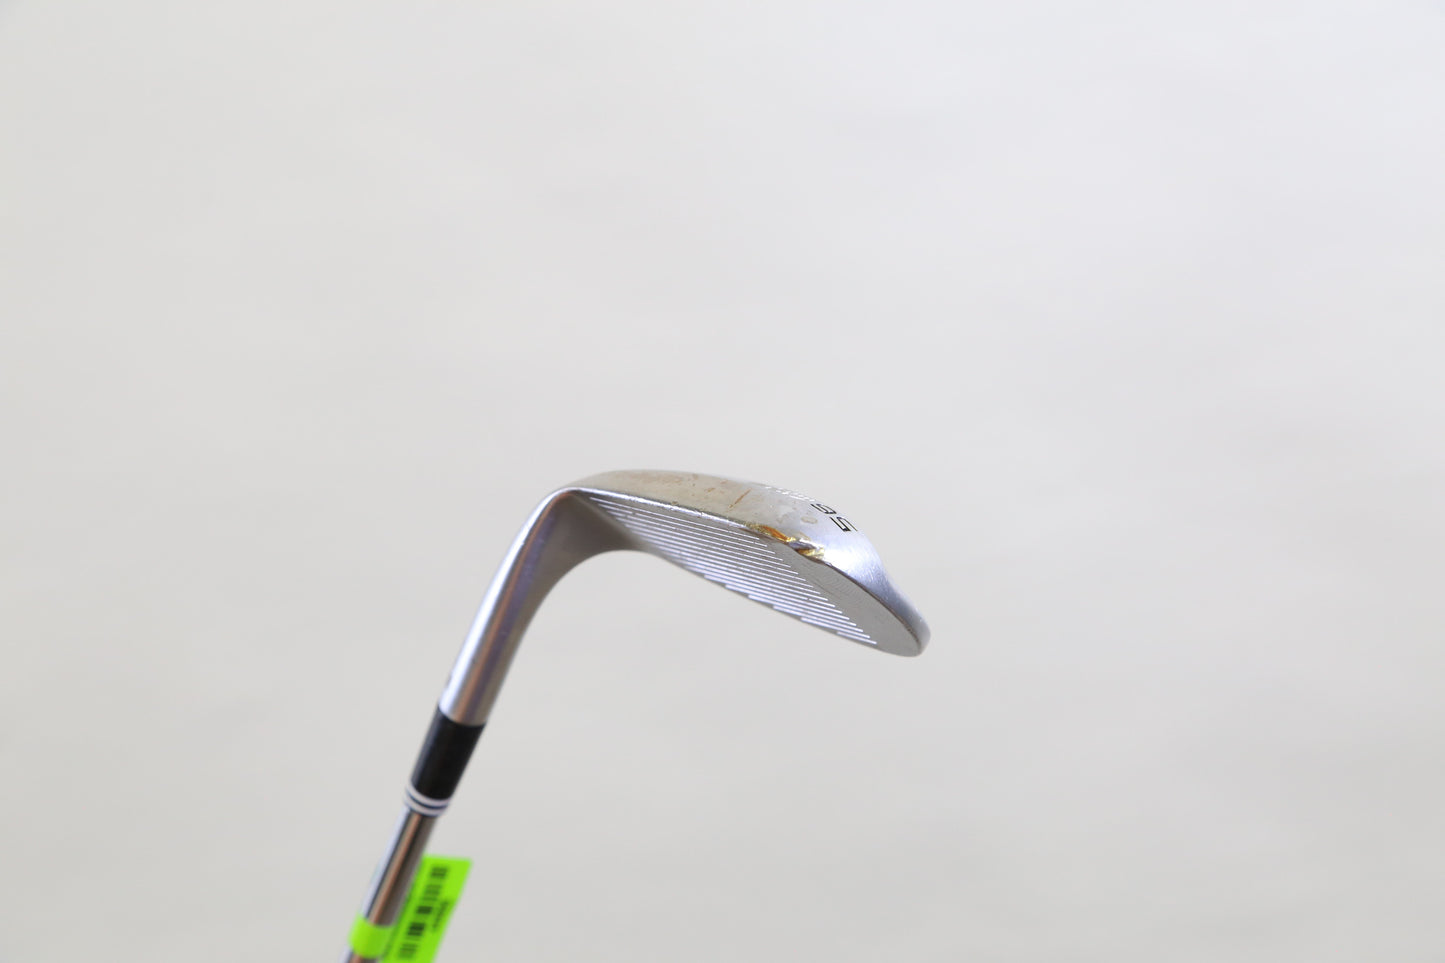 Used Cleveland RTX-4 Mid Grind Tour Satin Sand Wedge - Right-Handed - 56 Degrees - Stiff Flex